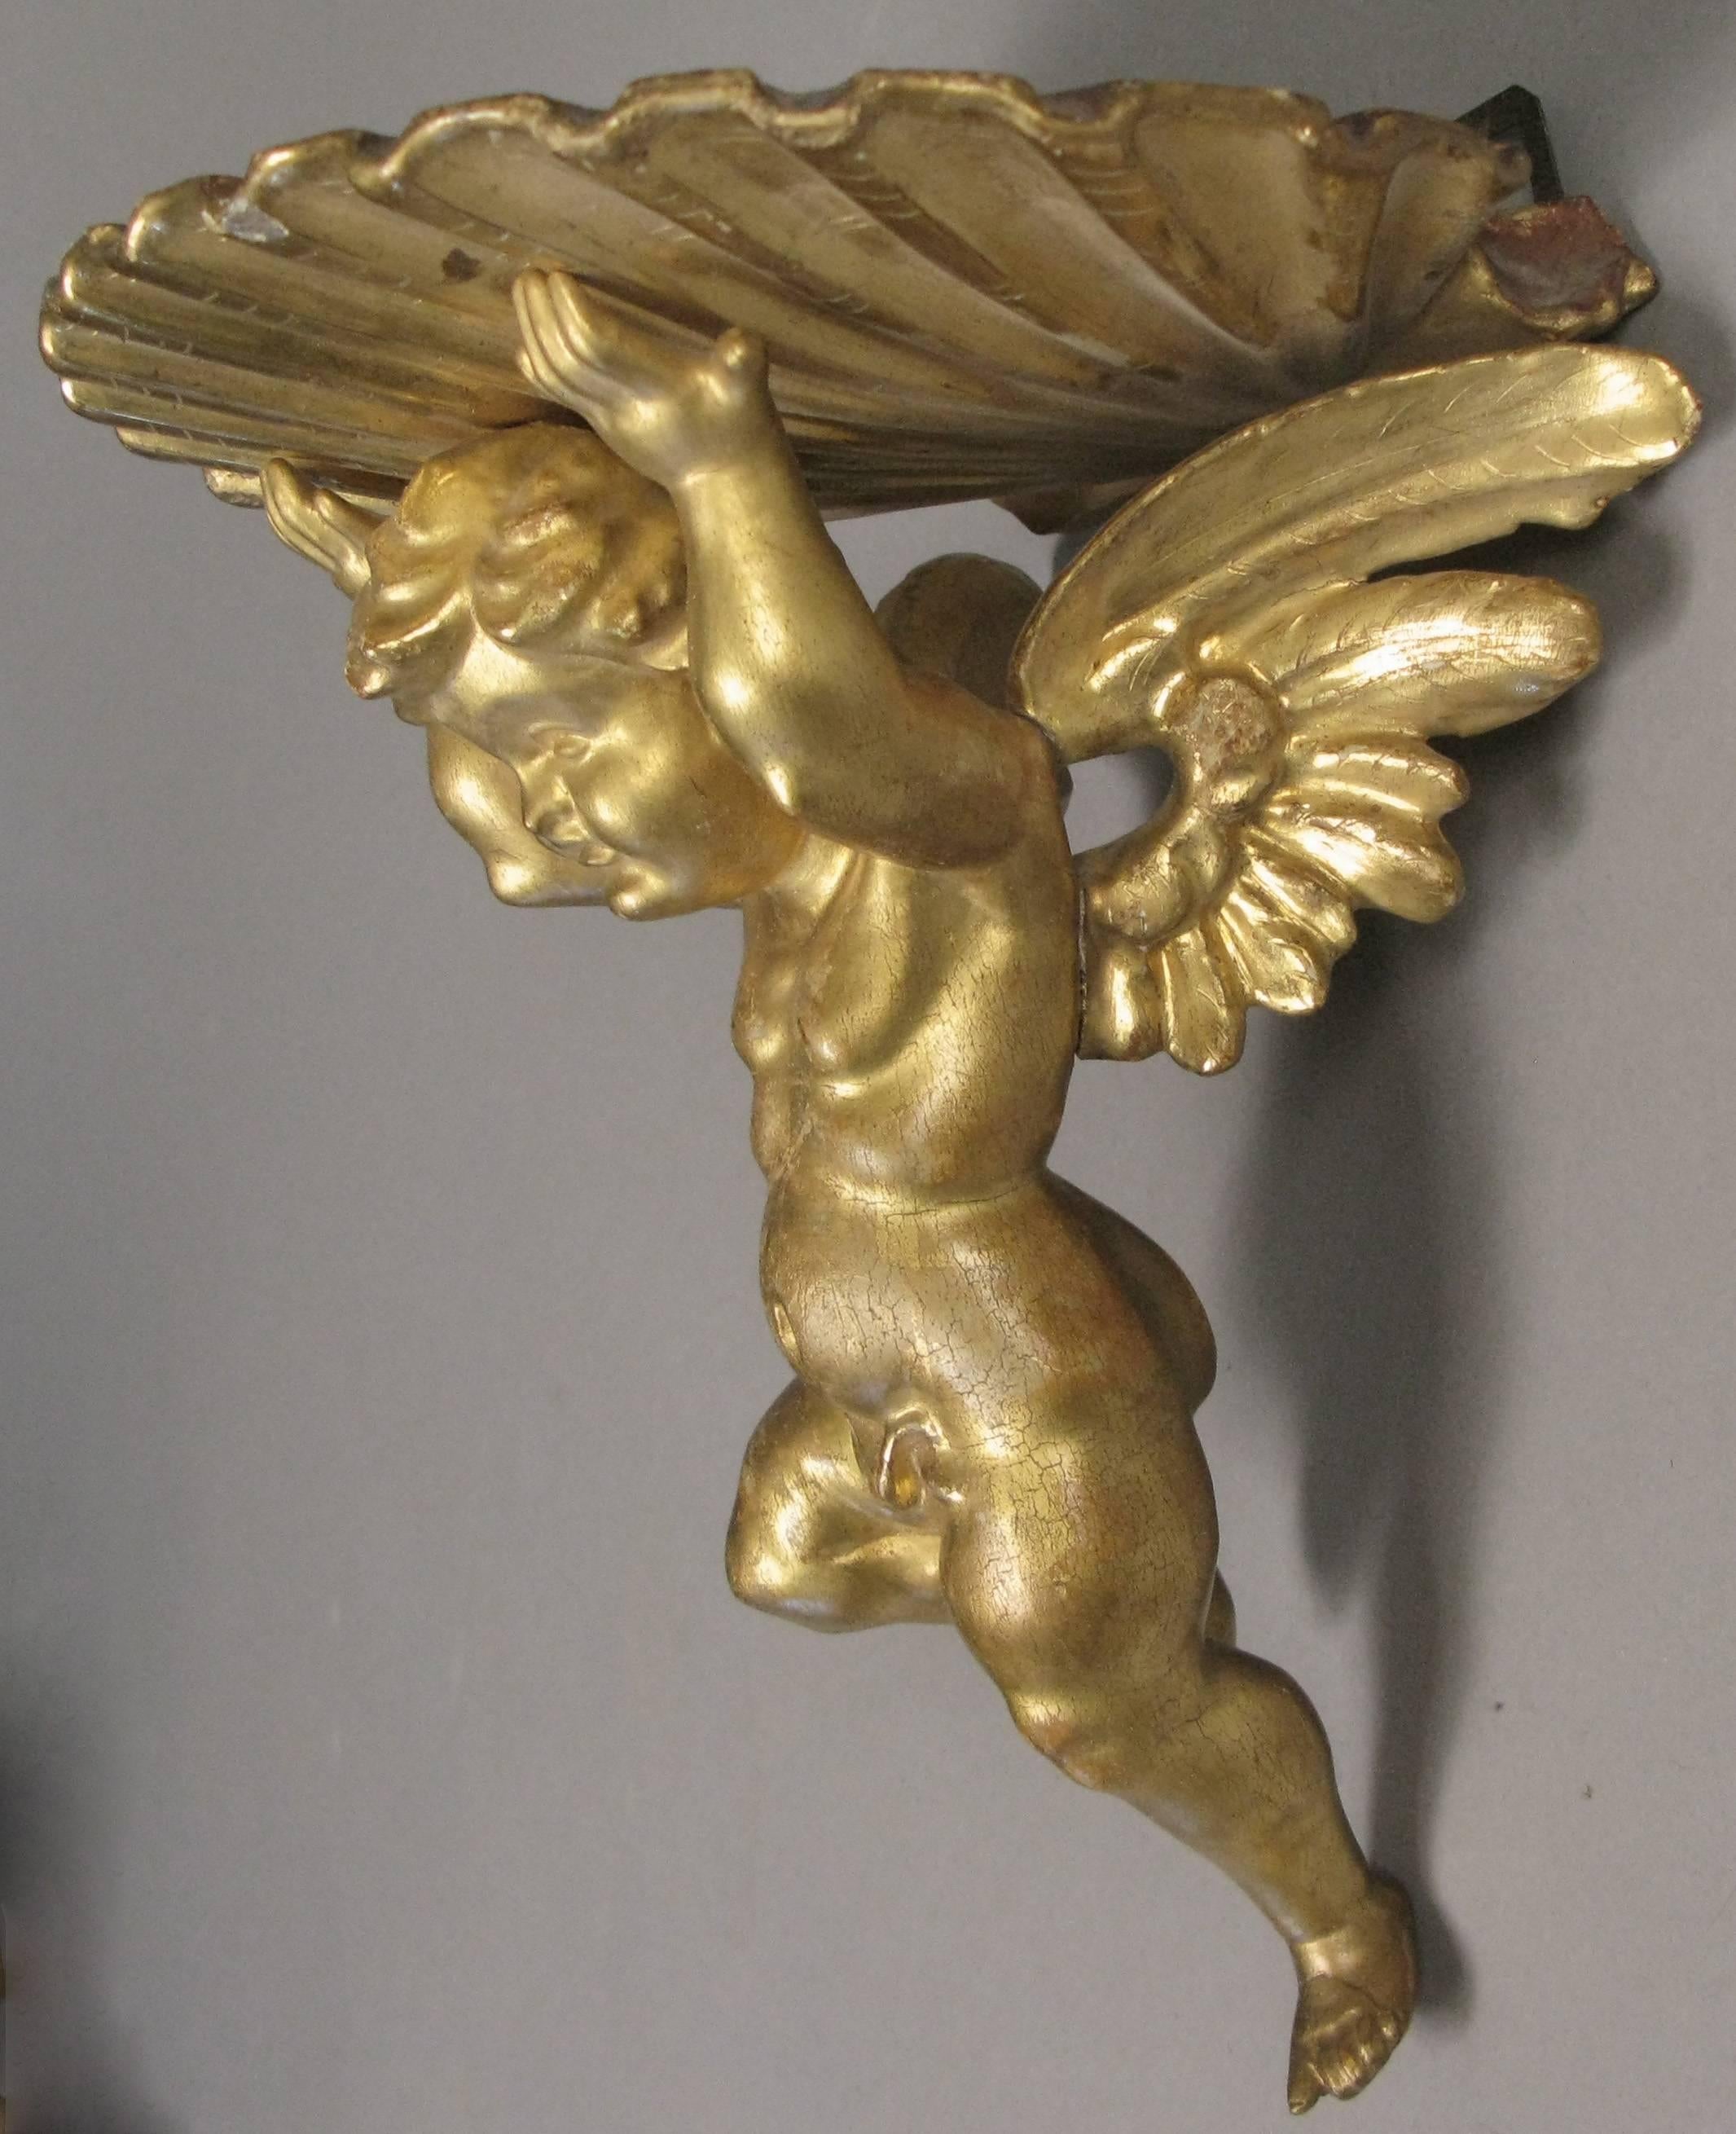 A delightful pair of shimmering winged putti wall brackets, exquisitely carved and gilded, with shell form tops. Beautiful decorative and functional pieces, really wonderful in person!